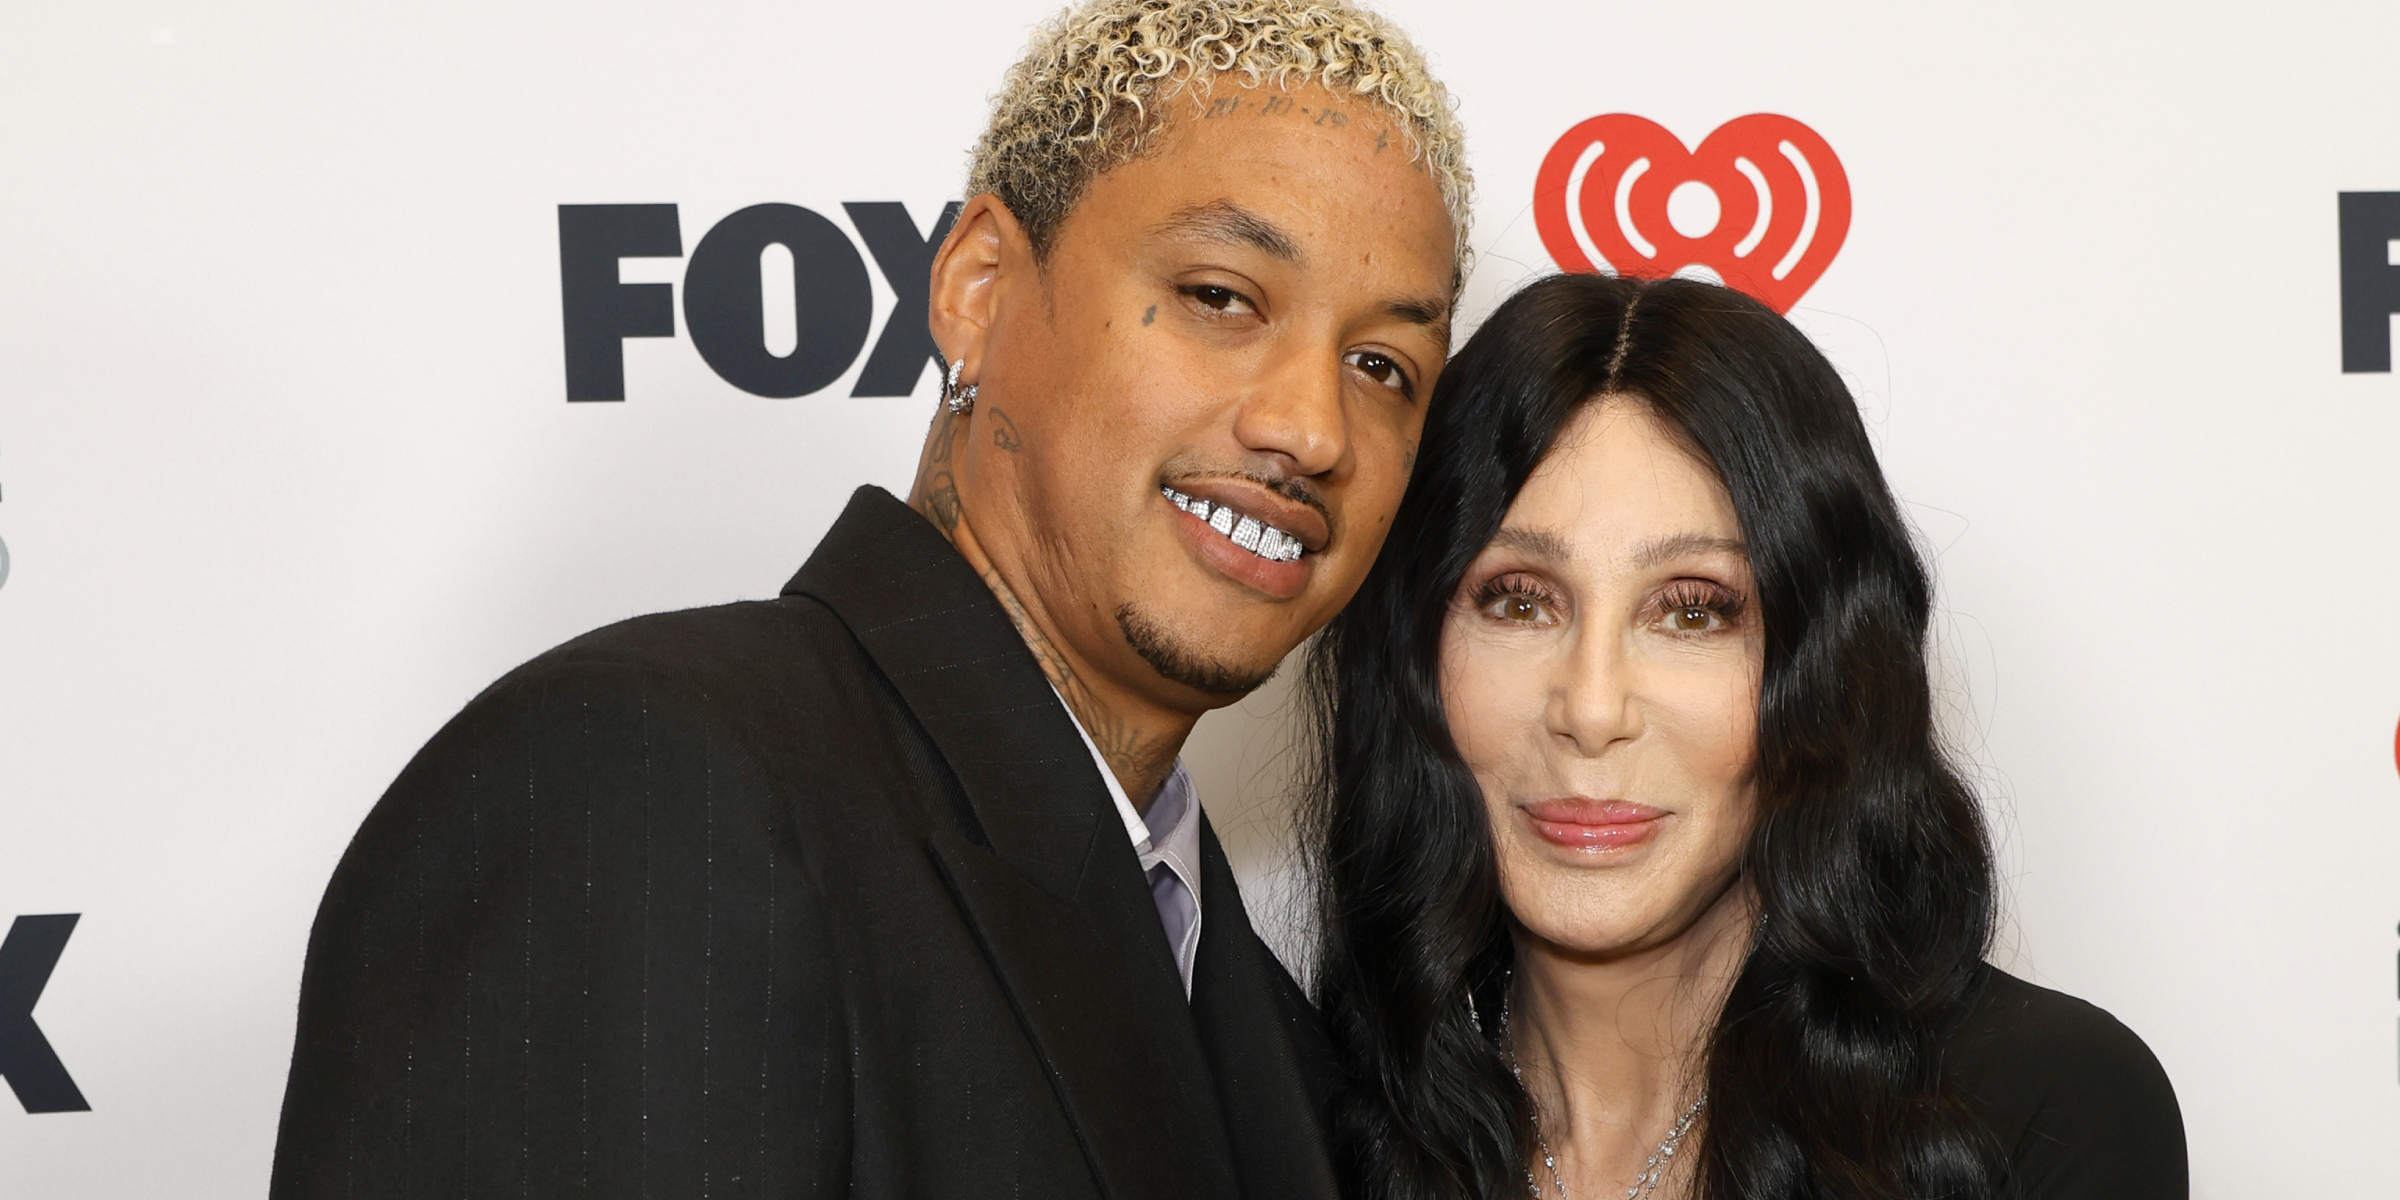 Alexander 'AE' Edwards and Cher | Source: Getty Images